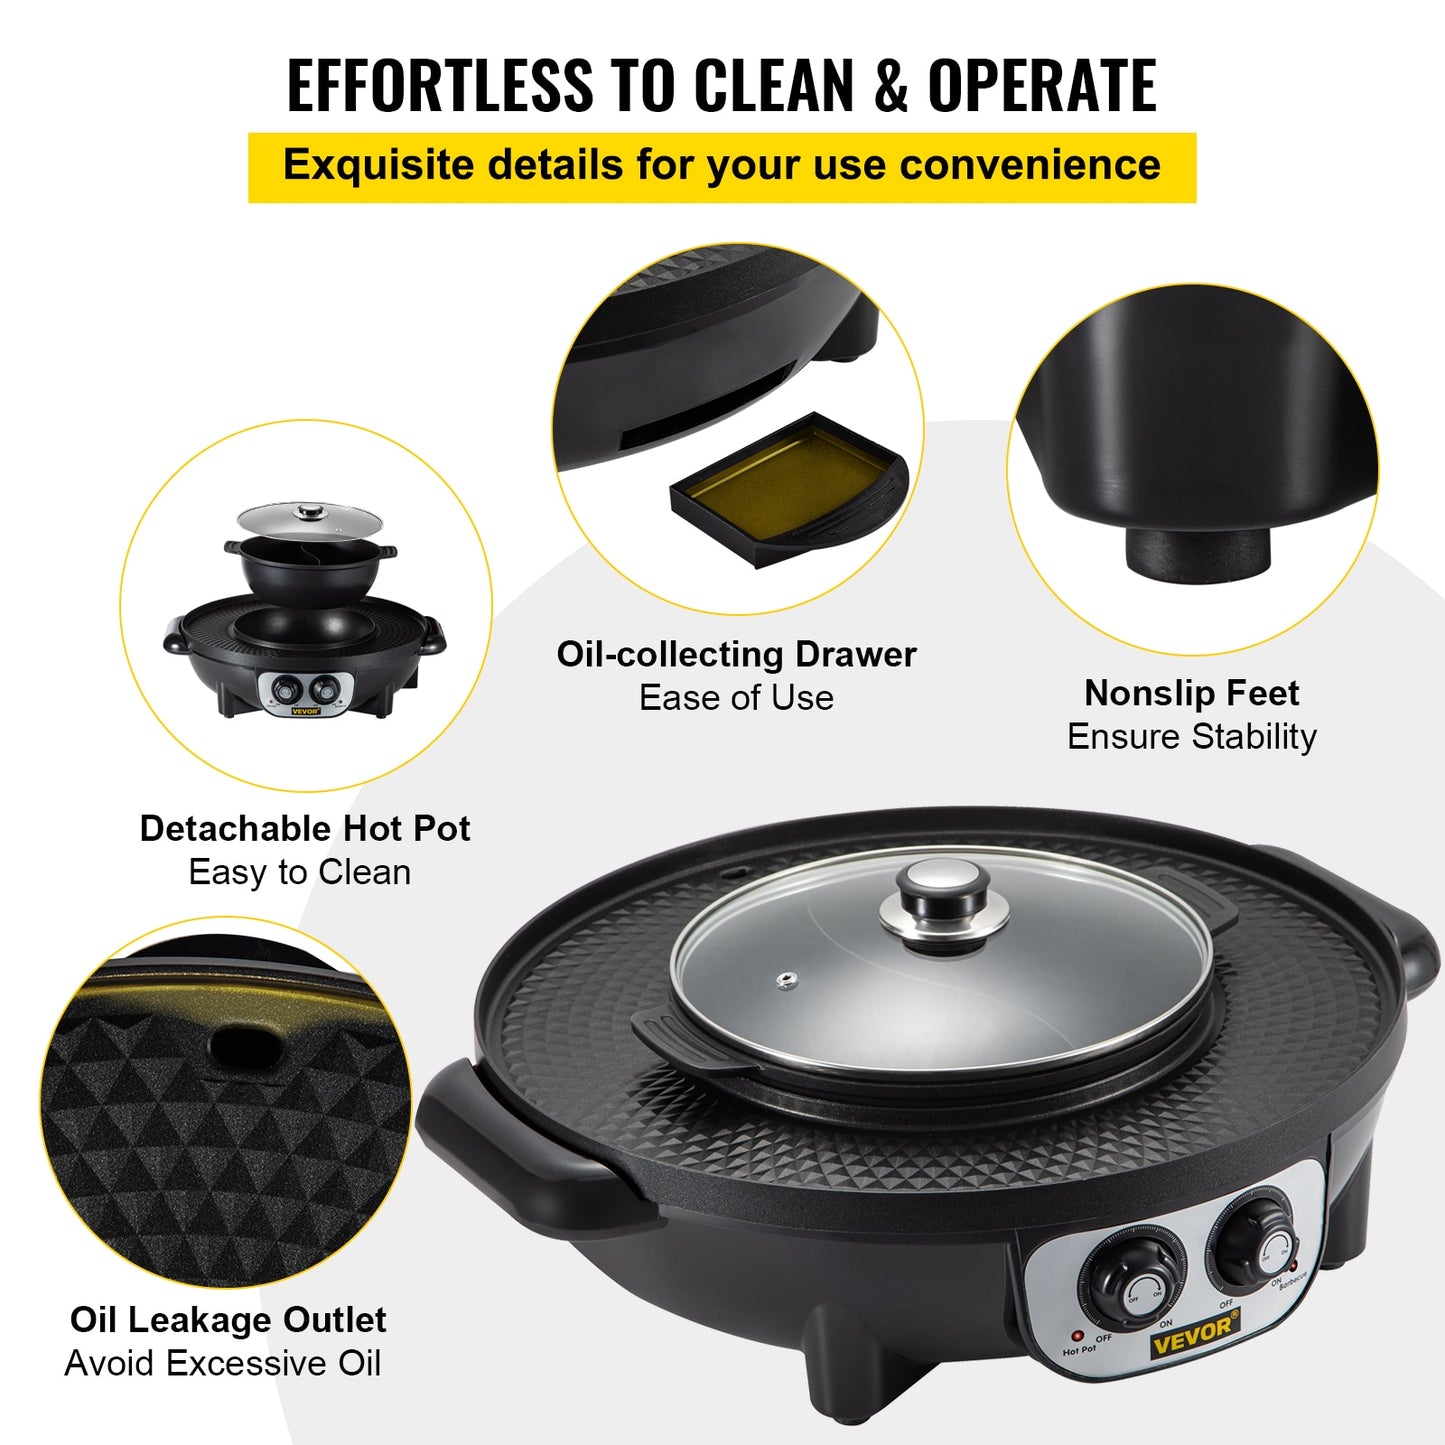 VEVOR 2 in 1 Electric Hot Pot BBQ Grill 2200W Multifunction Portable Home Non-Stick Split Pot Smokeless Skillet Barbecue Pan